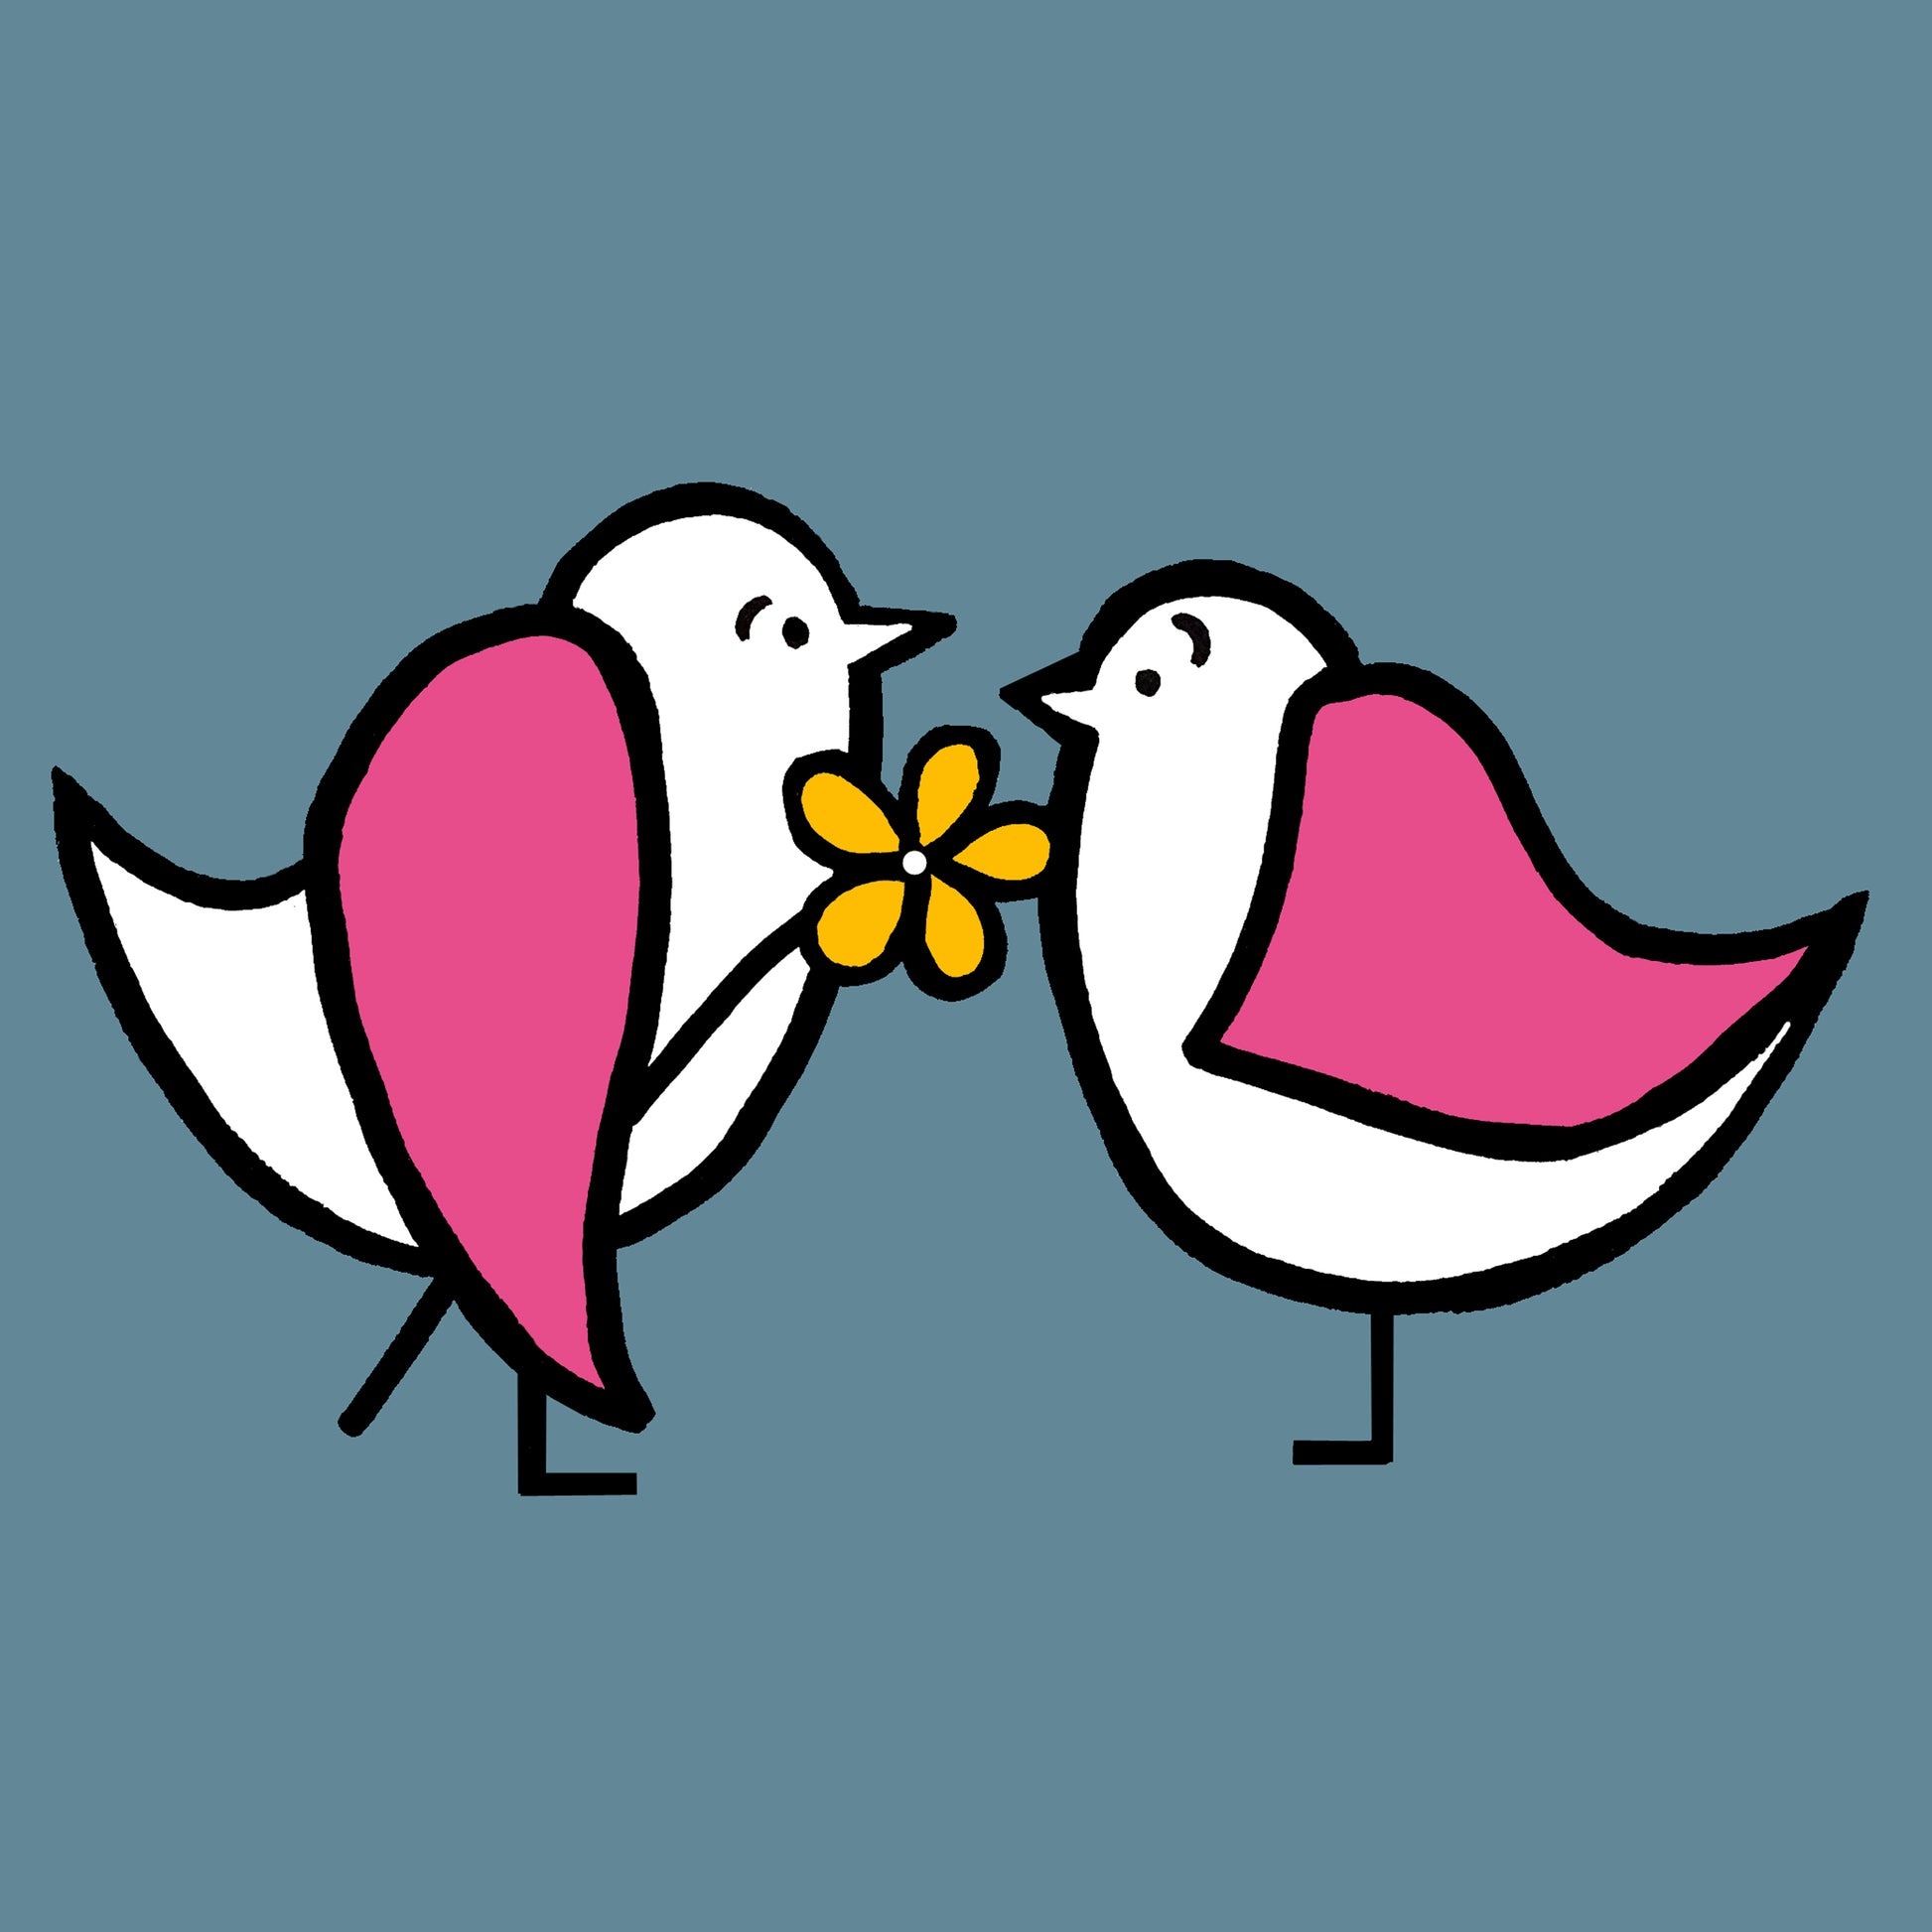 Original print called say it with flowers. Two pink winged seagulls are facing each other one is holding a yellow flower under its wing. The background is a blue teal.